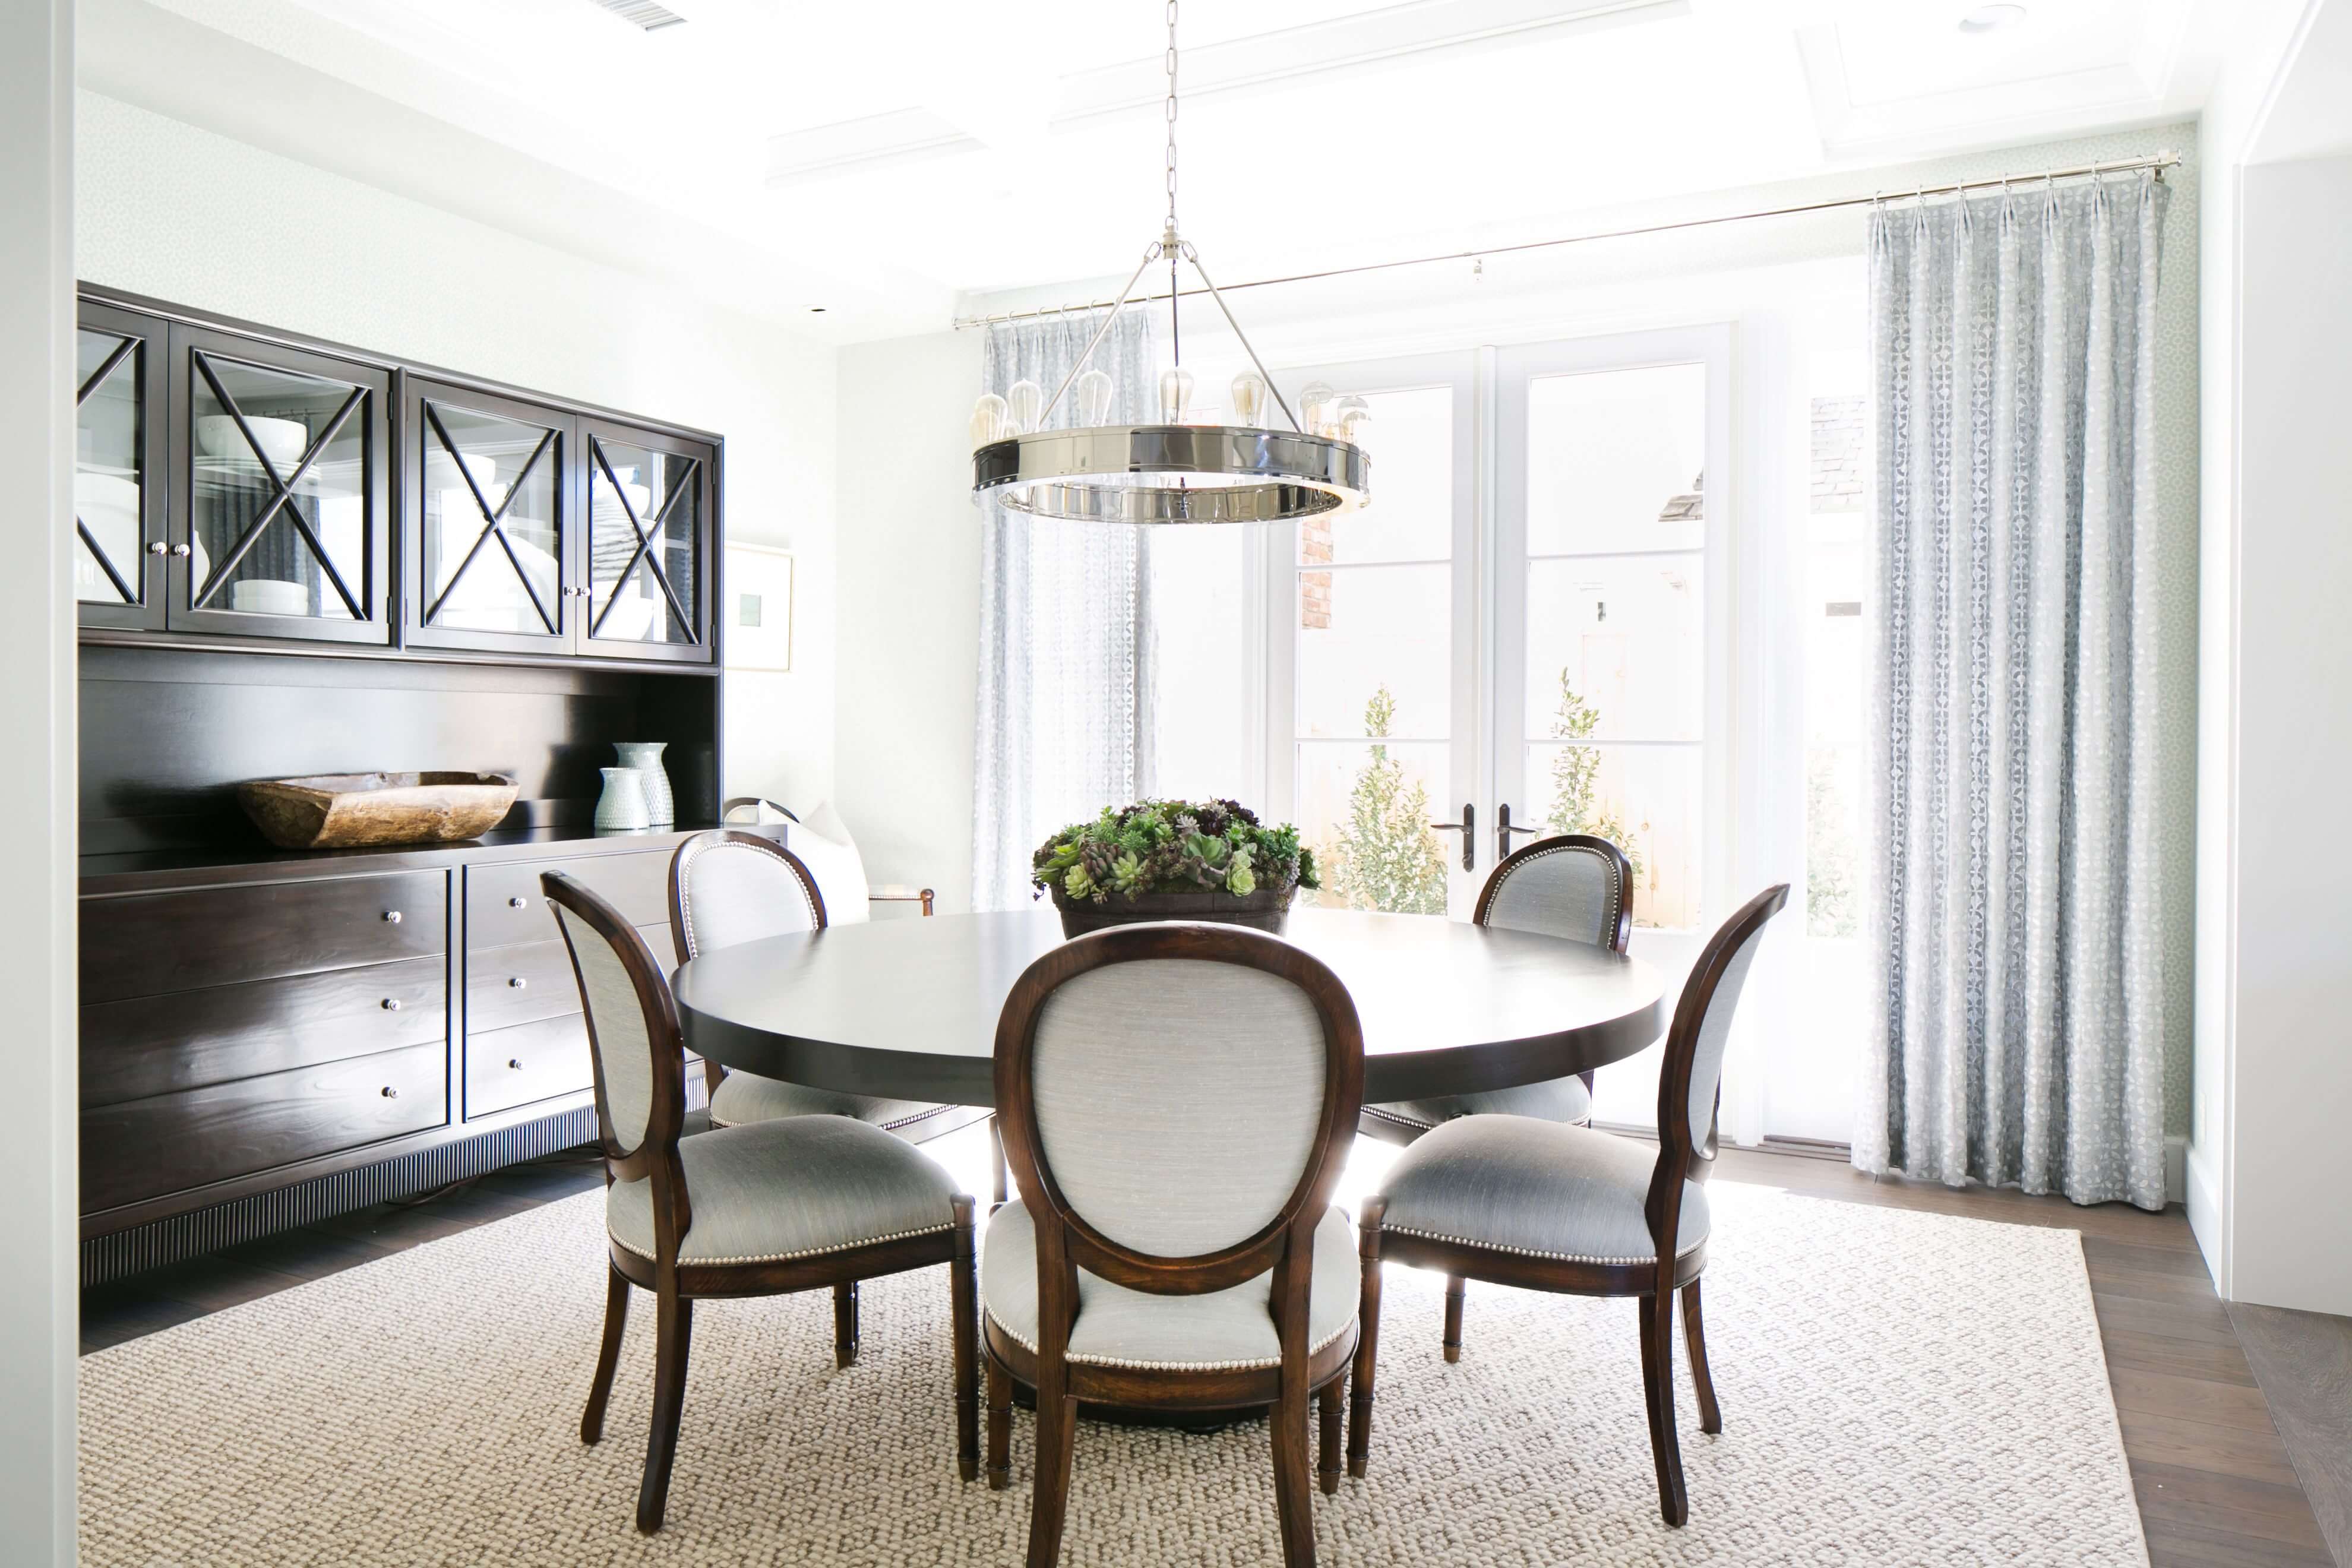 The Most Elegant Round Dining Room Tables 2019
